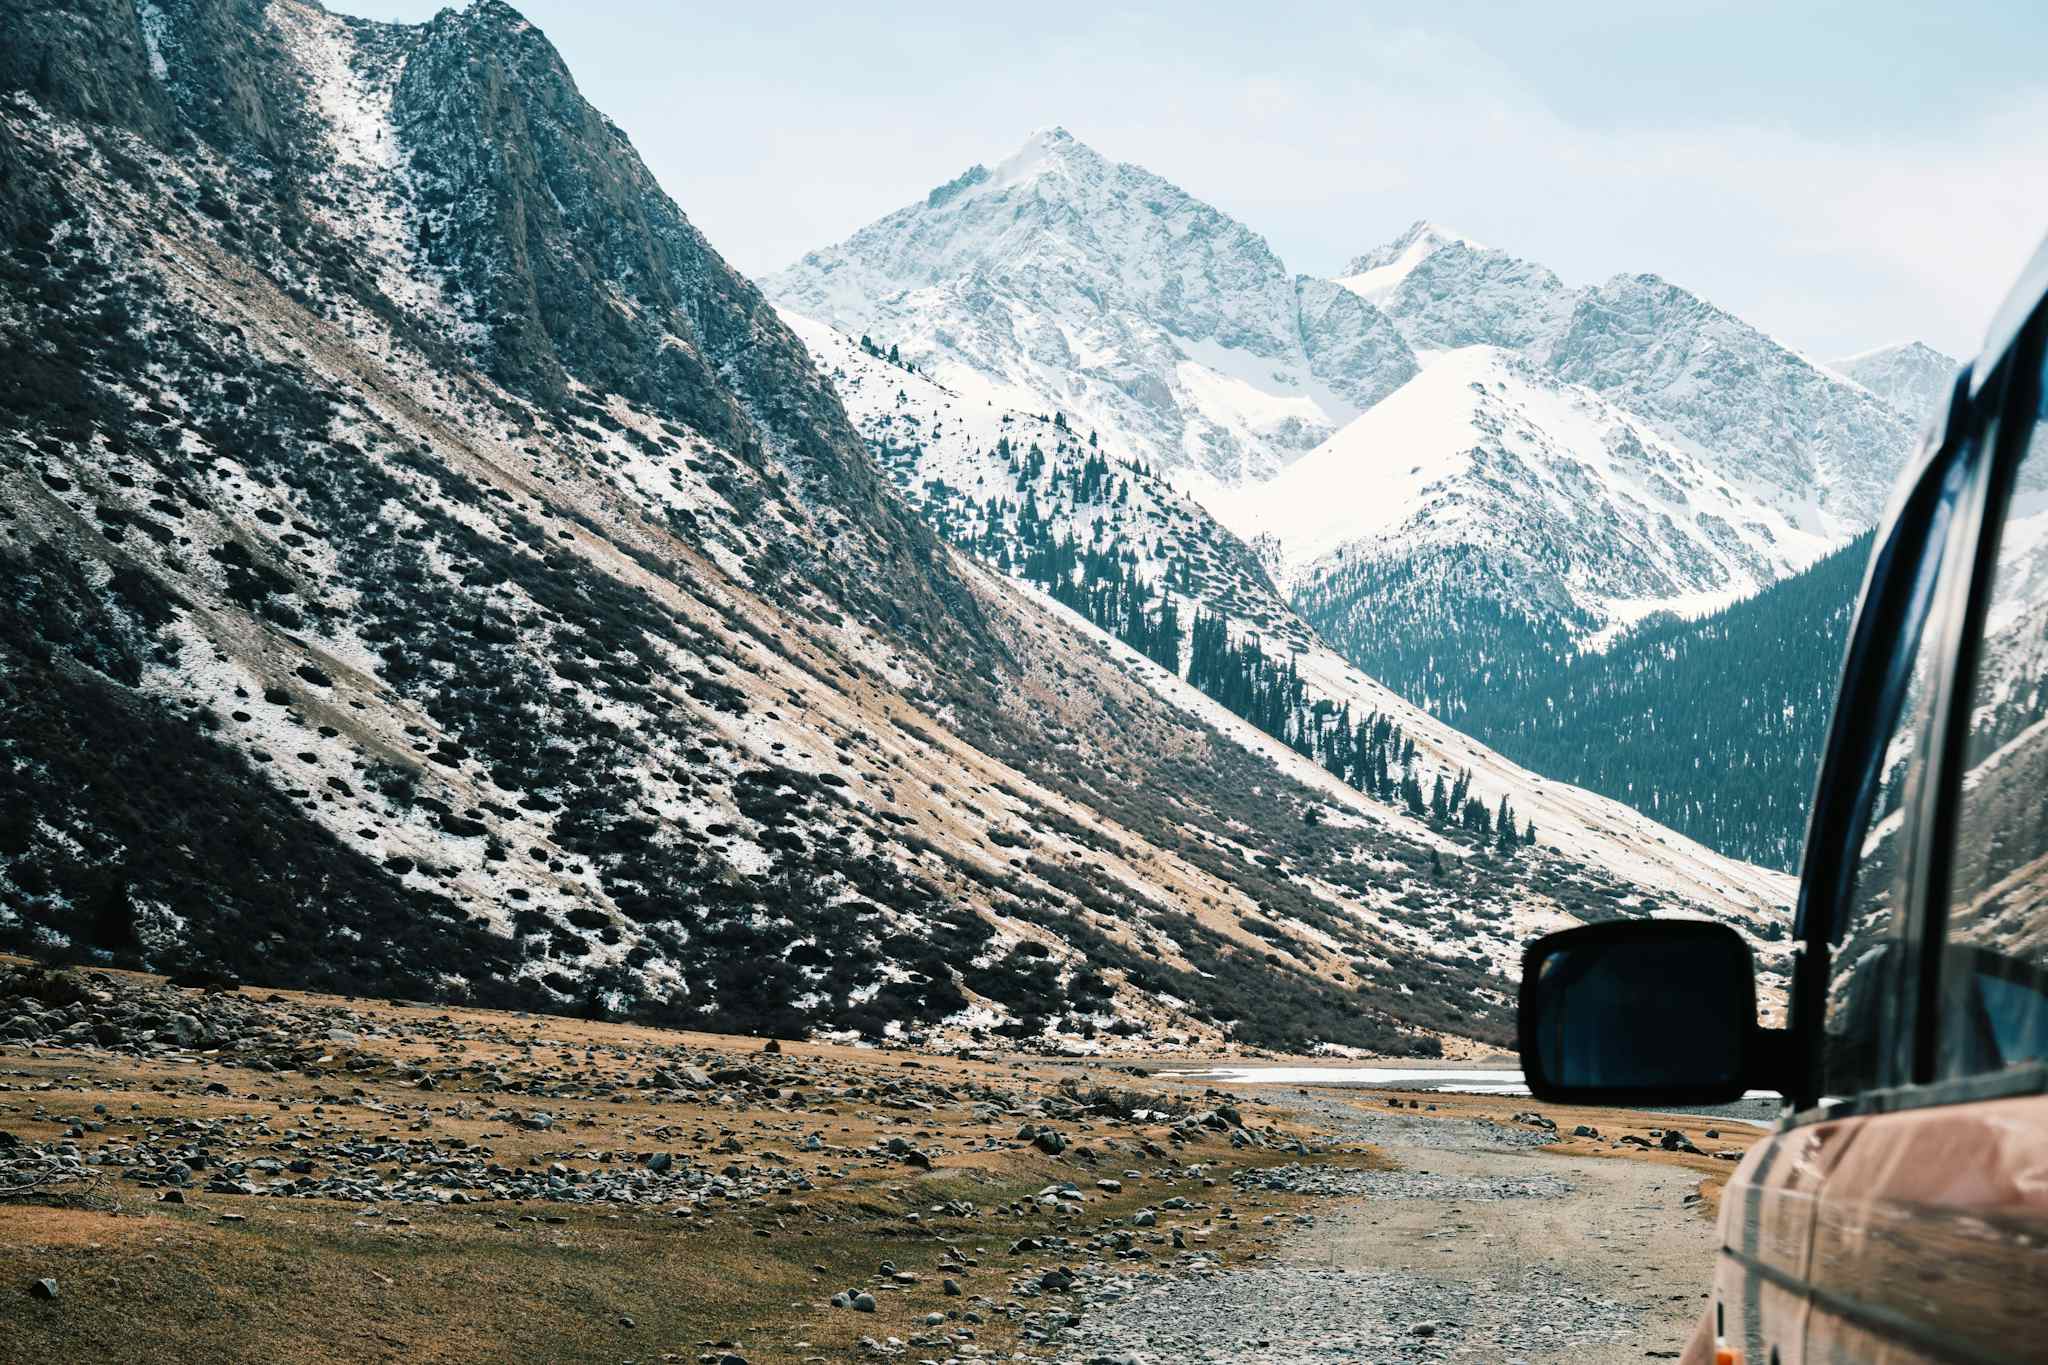 A 4WD vehicle heading into the snowy Tian Shan Mountains